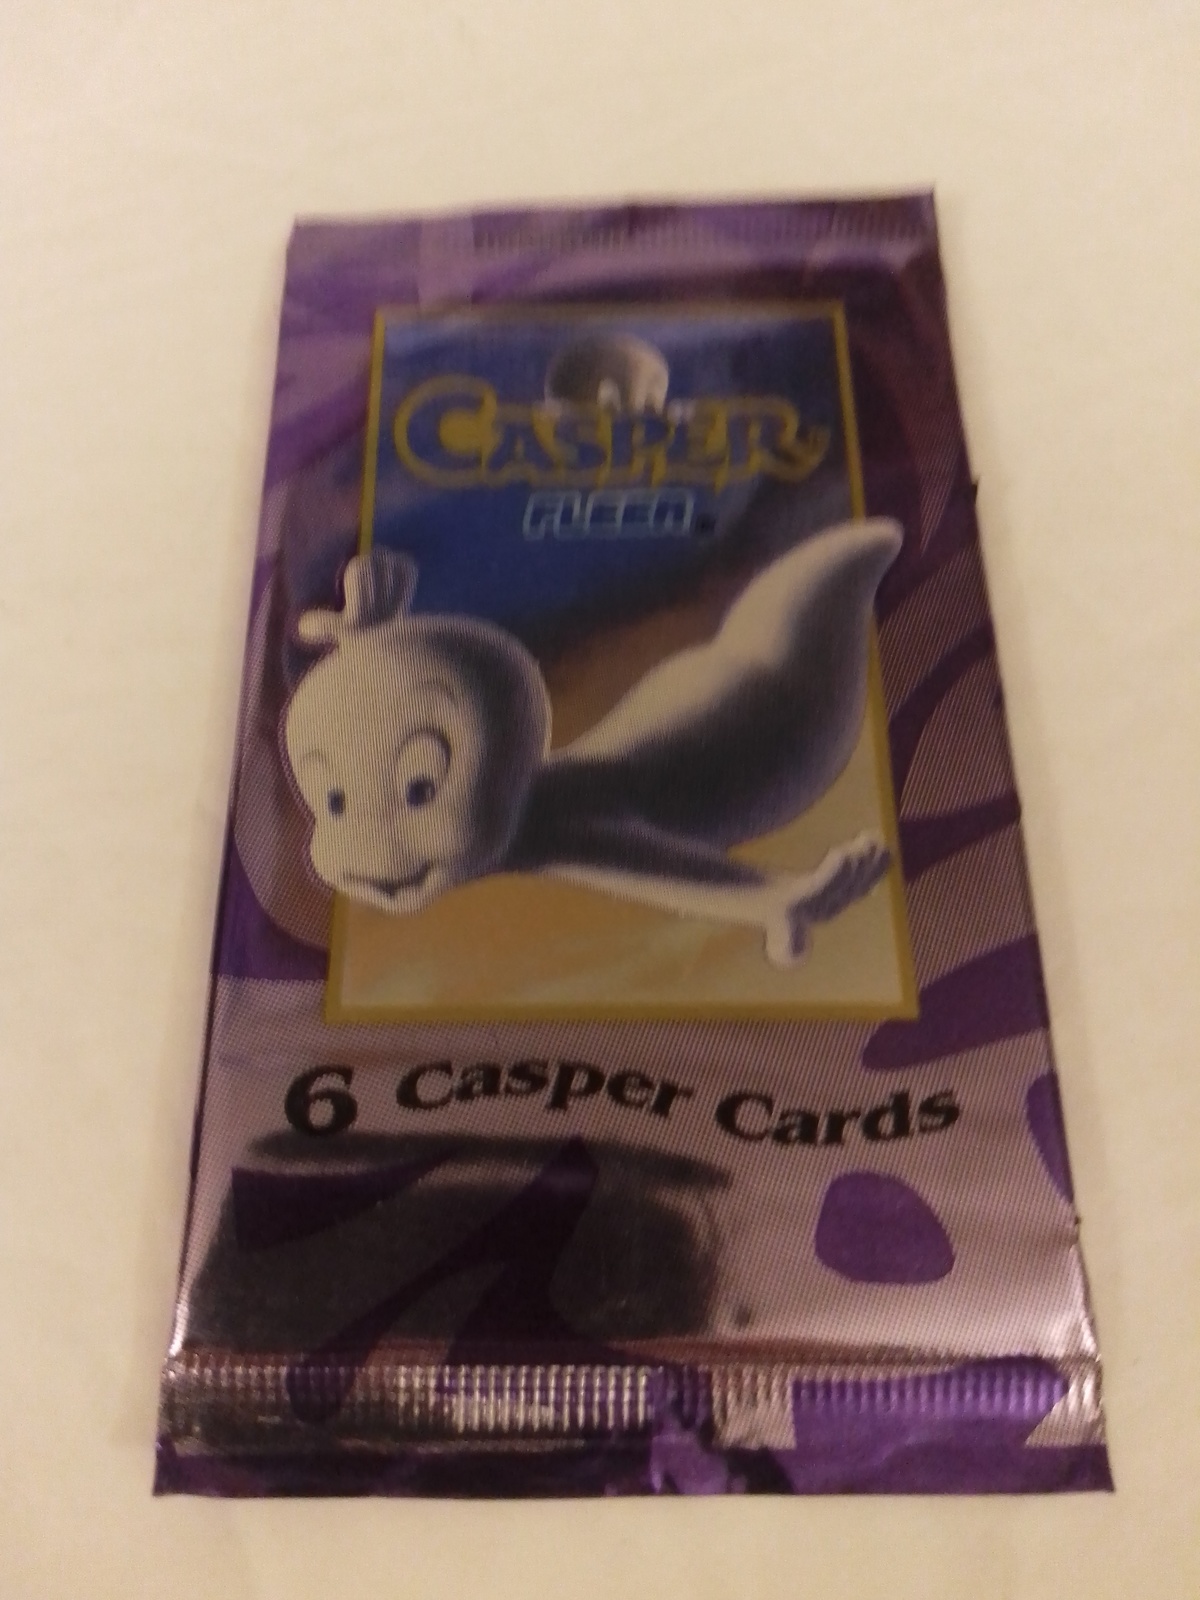 1995 Fleer Casper The Friendly Ghost Movie Trading Cards Sealed Pack Of 6 Cards  - $7.99